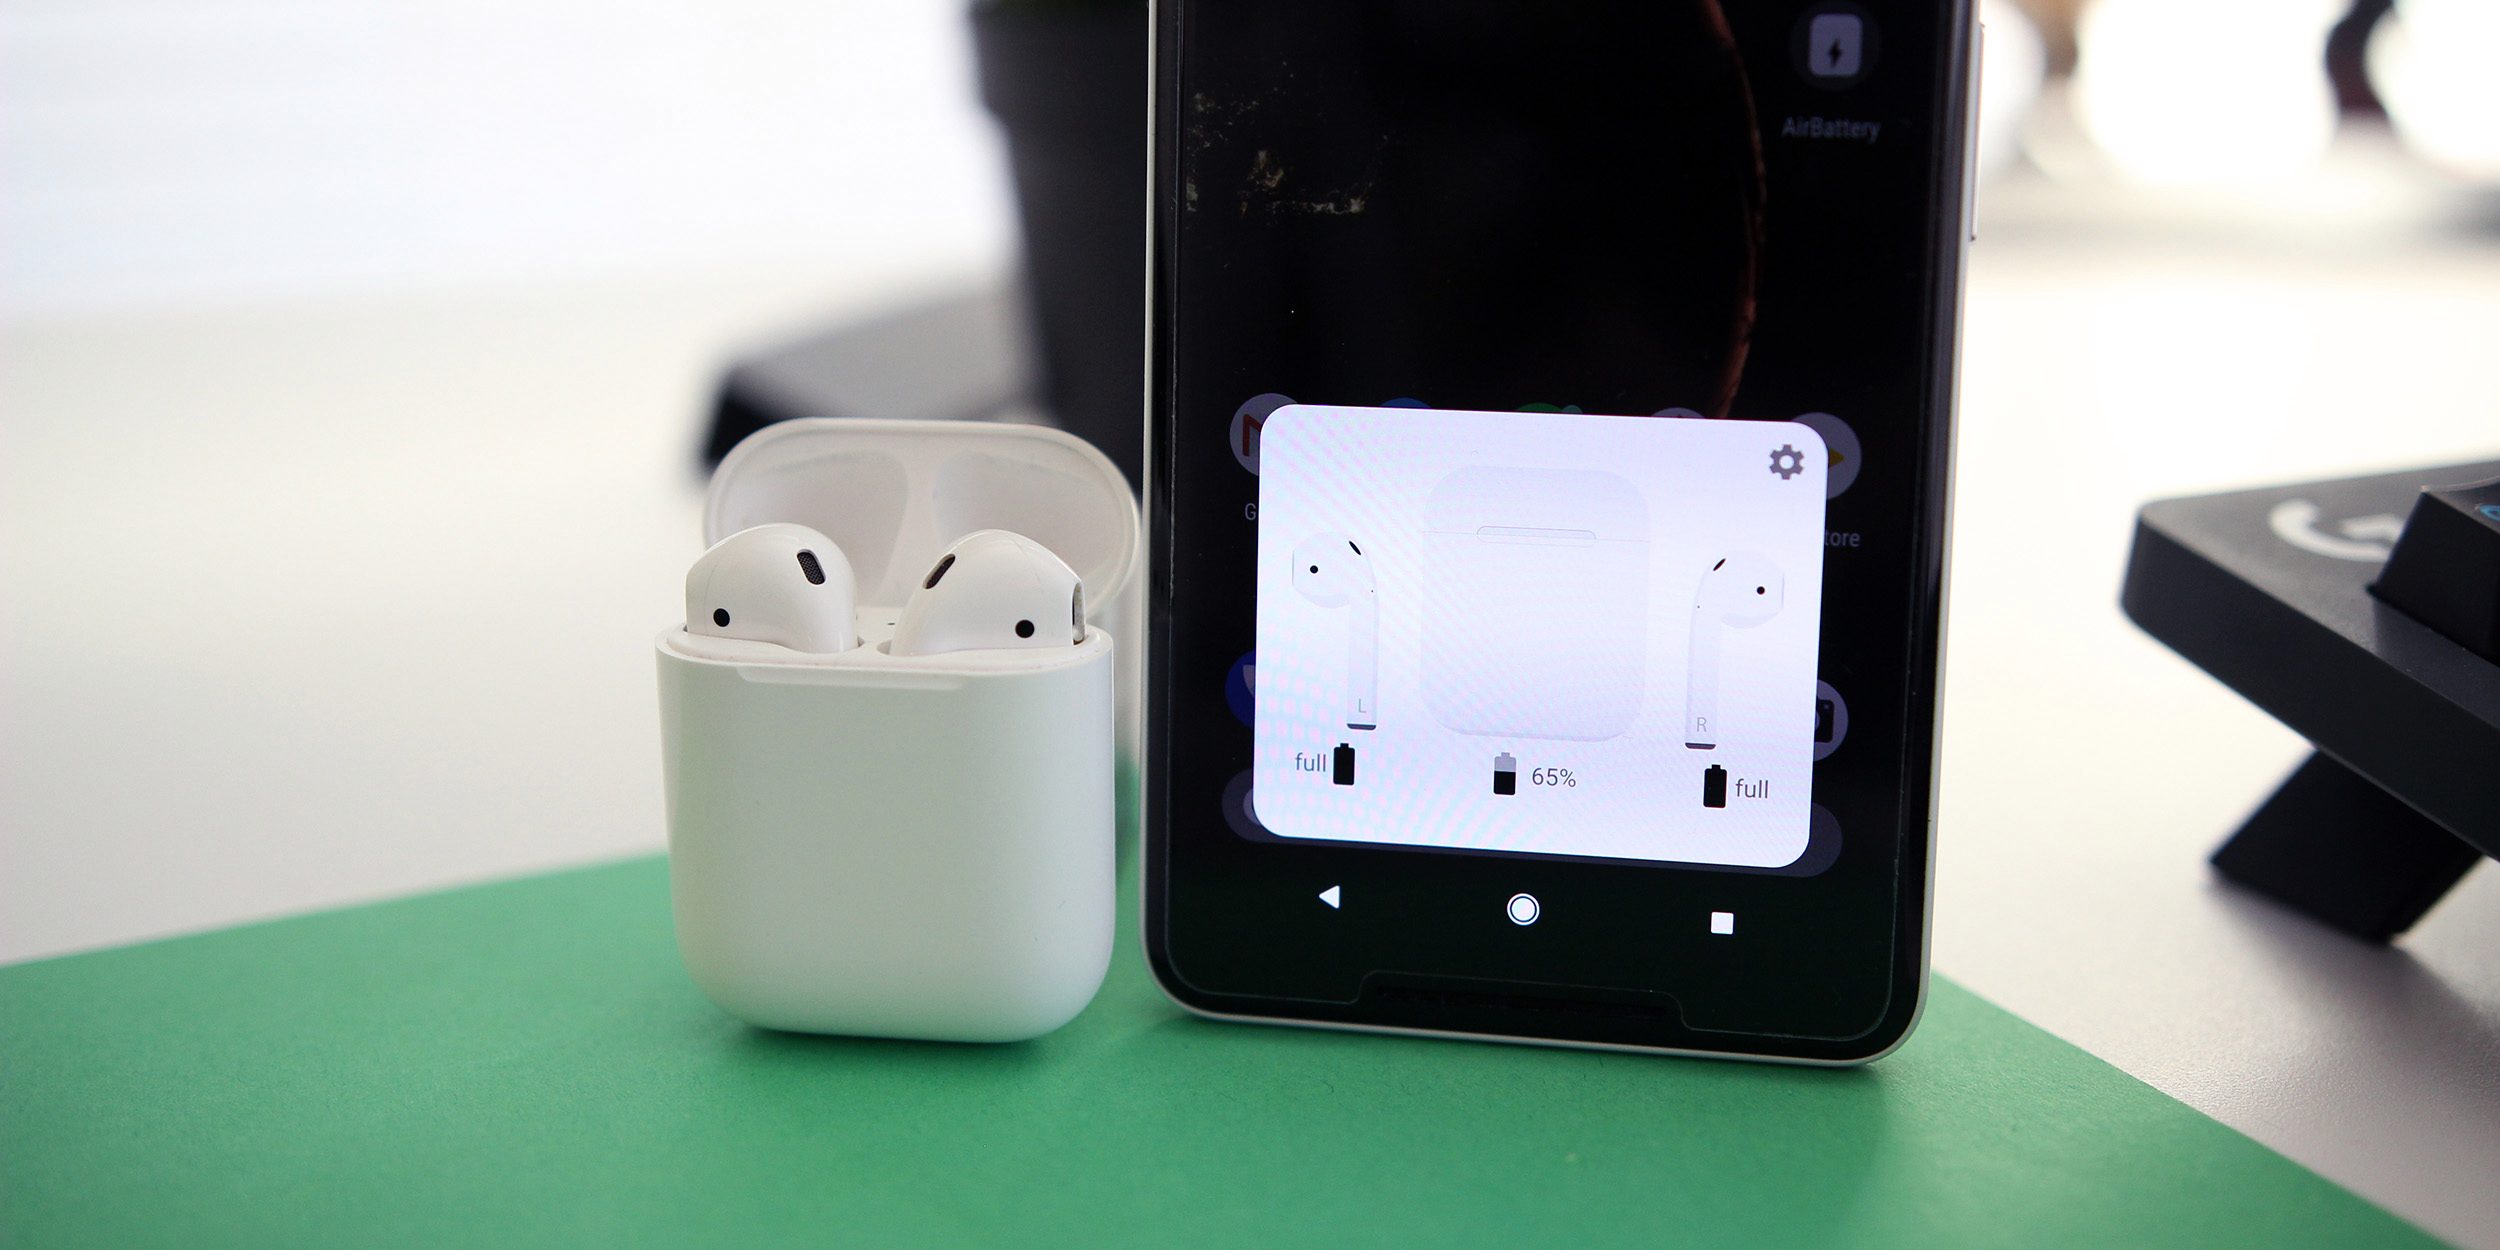 How to check AirPods battery on iPhone